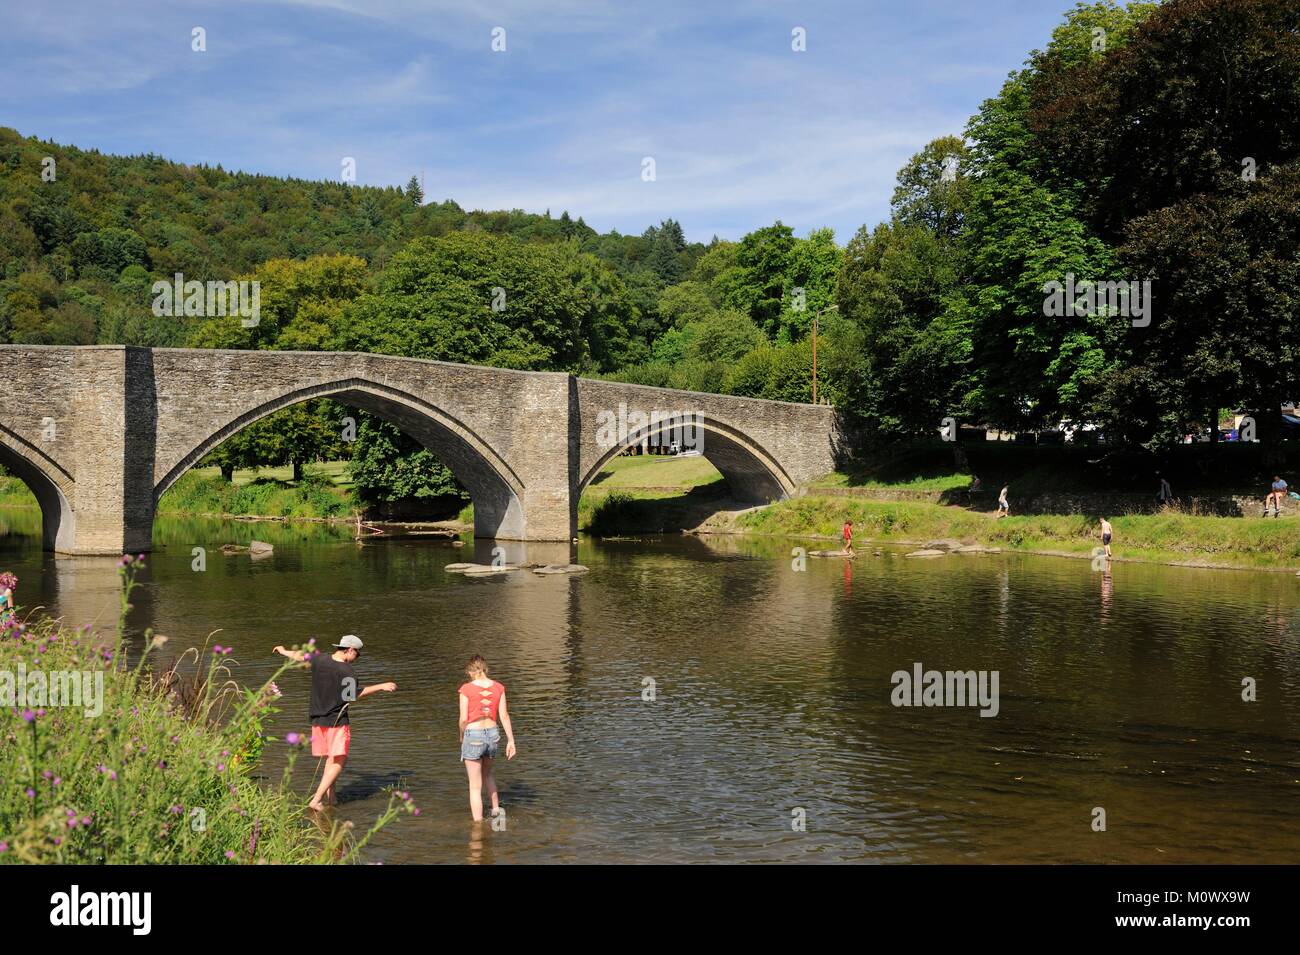 Belgium,Luxembourg,Bouillon,Cordemoy bridge or pulley bridge on the Semois,two people dipping their feet in the water Stock Photo